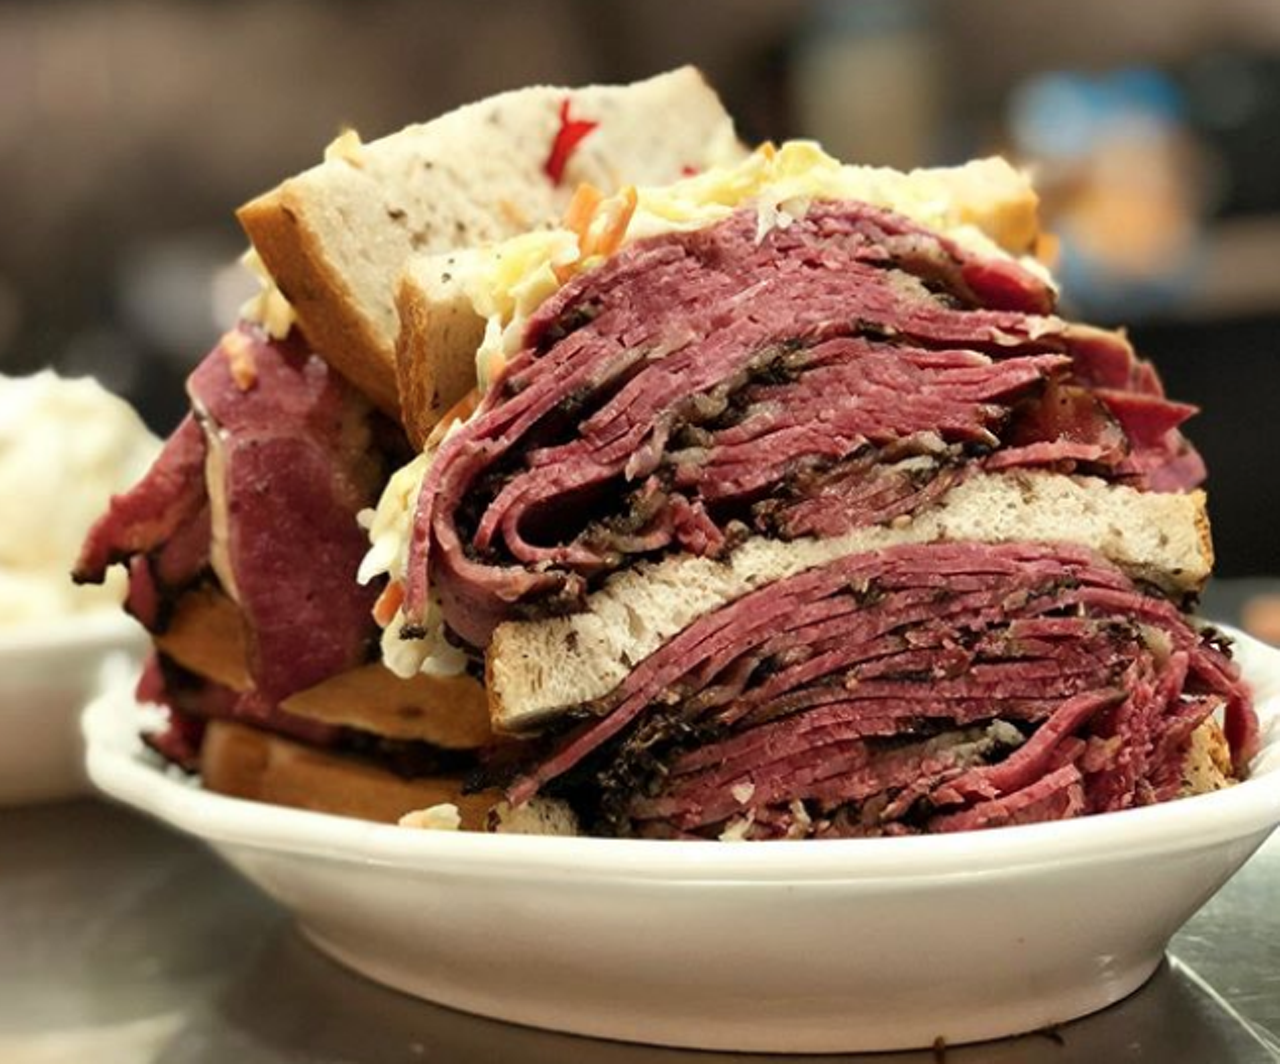 Kenny & Ziggy's
2327 Post Oak Blvd, Houston, (713) 871-8883, kennyandziggys.com
In the mood for an impeccable sandwich? Then get in the car and head to this Houston spot, where you can score New York-style deli classics. While the corned beef sandwich is a no brainer, you may also want to indulge in Yiddish favorites like the Mishmosh soup.
Photo via Instagram / kennyandziggys